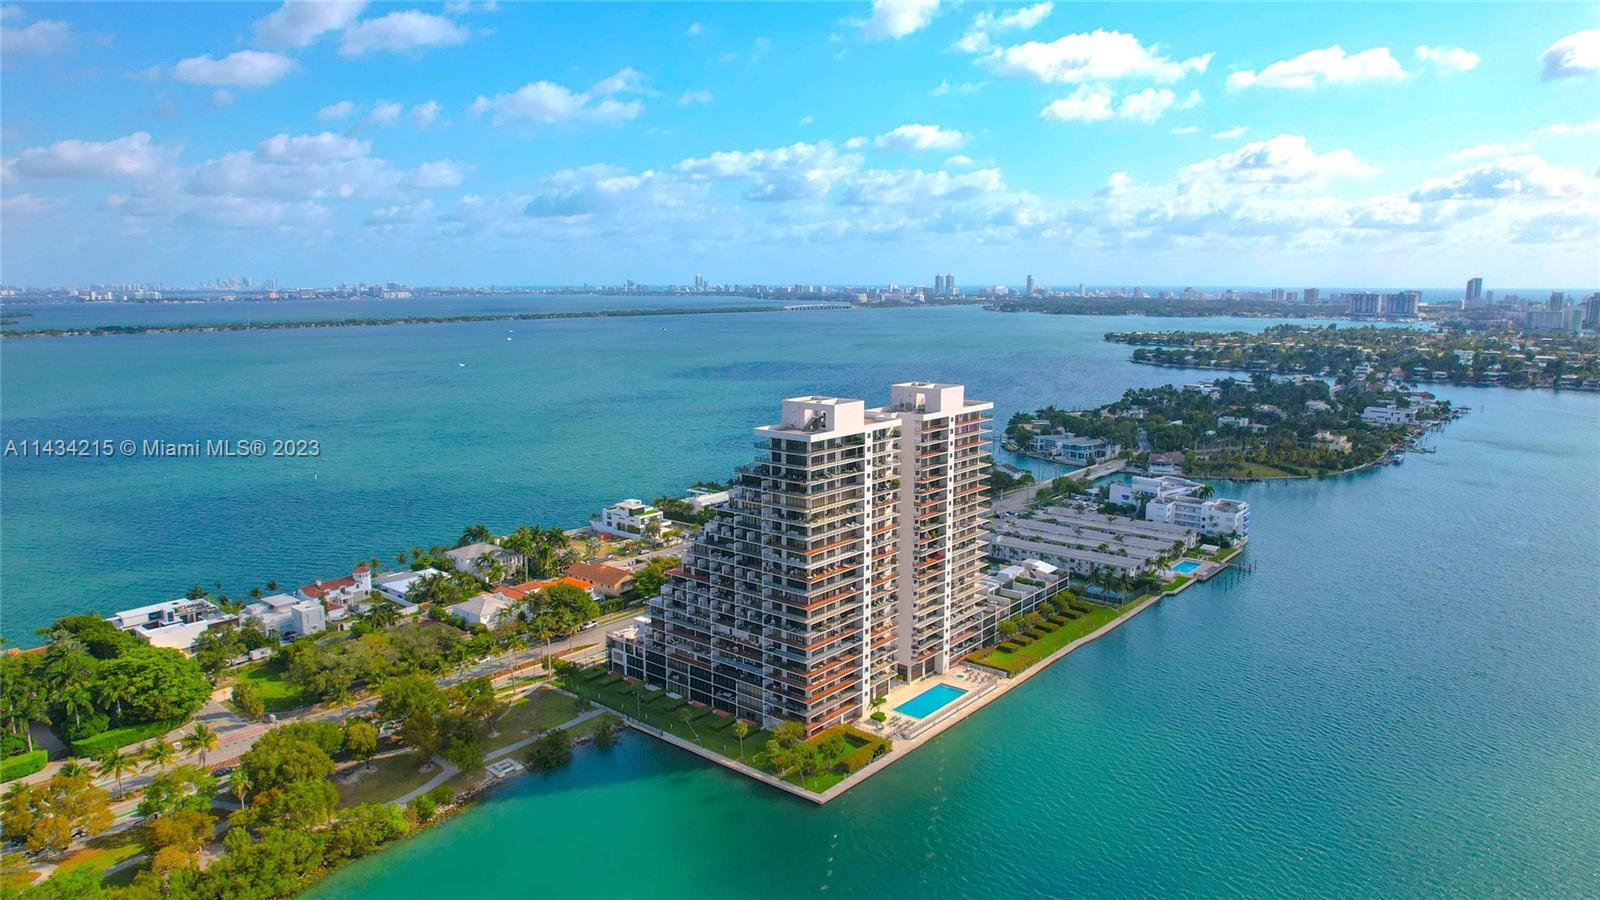 Contemporary Waterfront  3 bed 2/12 bath condo located on the Venetian Causeway. This  flow through unit has Amazing panoramic views of north and south  Miami.  Either lounging in your living  or dining room  you will have unobstructed water views. Large balconies with lounge chairs as well as outdoor dining table. Sit back and relax and watch cruise ships come & go. Newly updated flooring throughout the unit as well updated baths. Featured amenities, new gym and sauna, two large pools as well as two tennis courts, play area for the kids, and dog run. Mins to Sunset Harbour, Lincoln Rd, shoppes, restaurants, Fresh Market, Publix, Trader Joe's and Whole foods. The ultimate living experience in the Heart of Miami !!! Small pets ok, 2 parking spaces